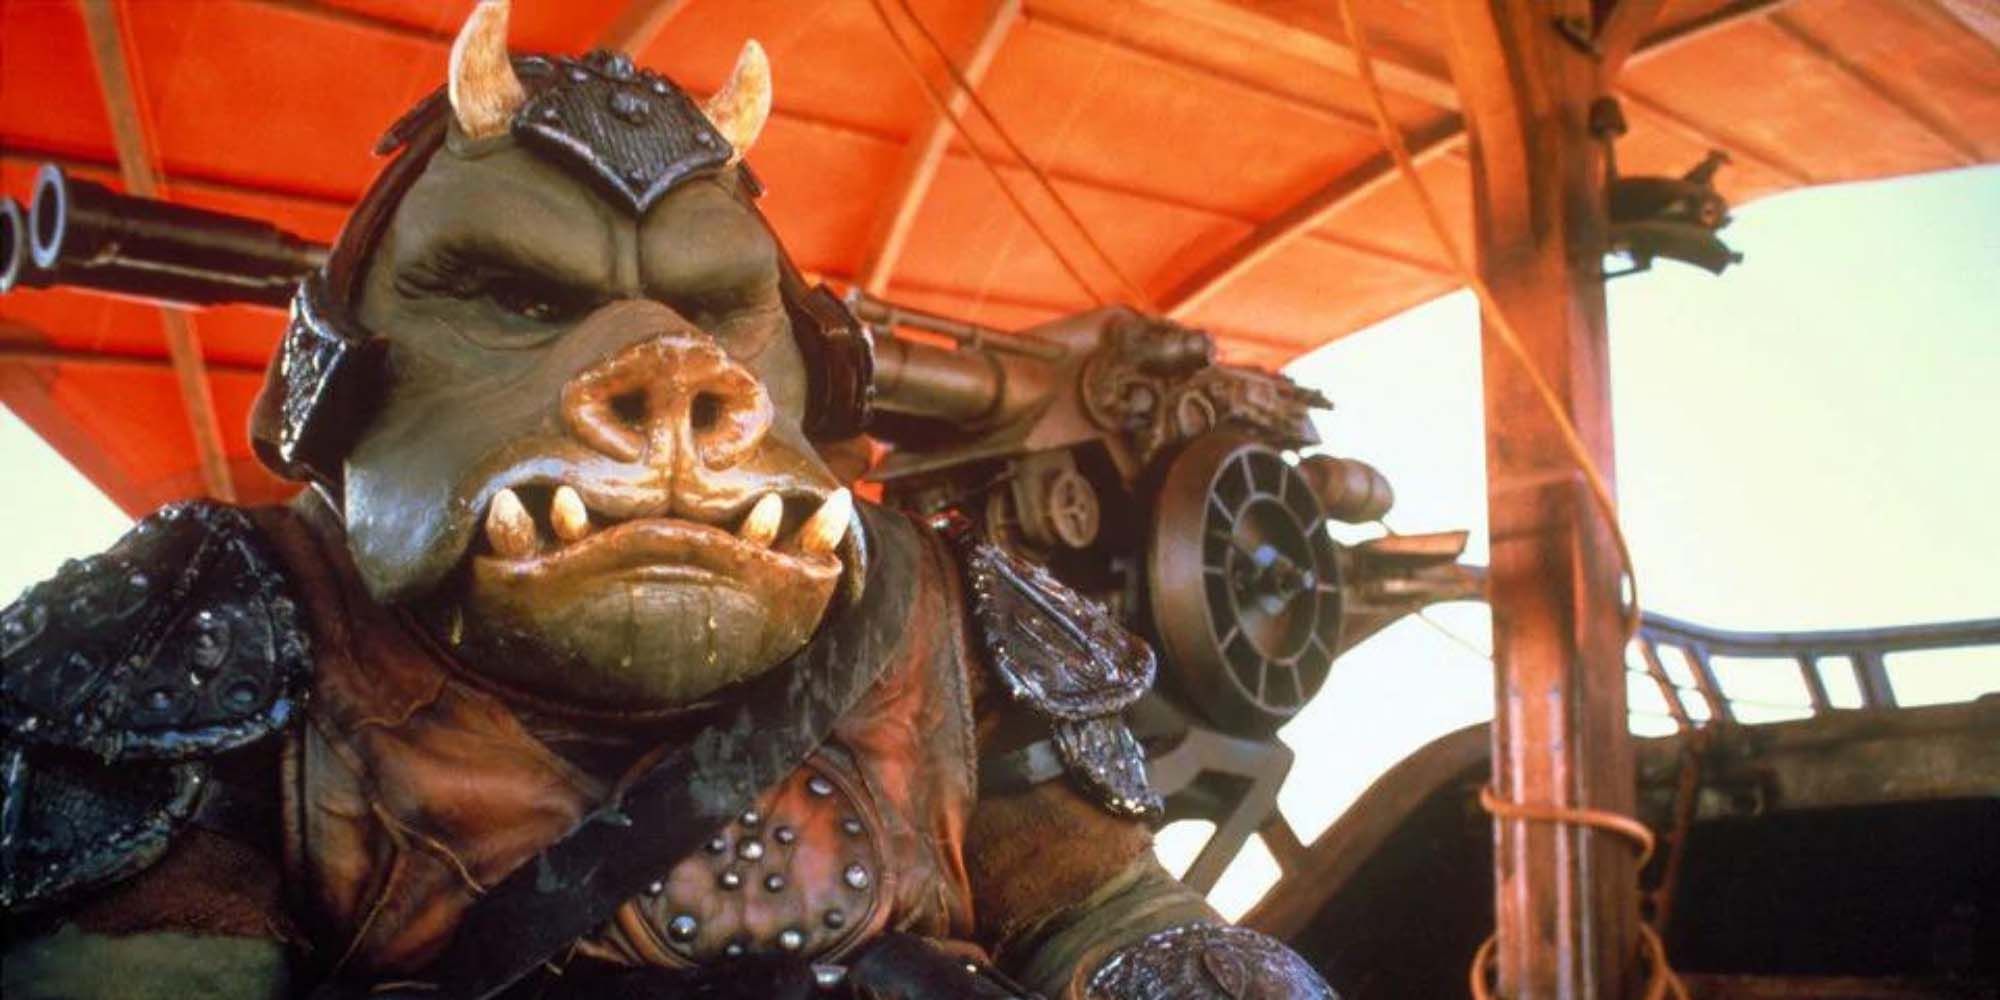 Image of a Gamorrean Guard from Star Wars return of the jedi